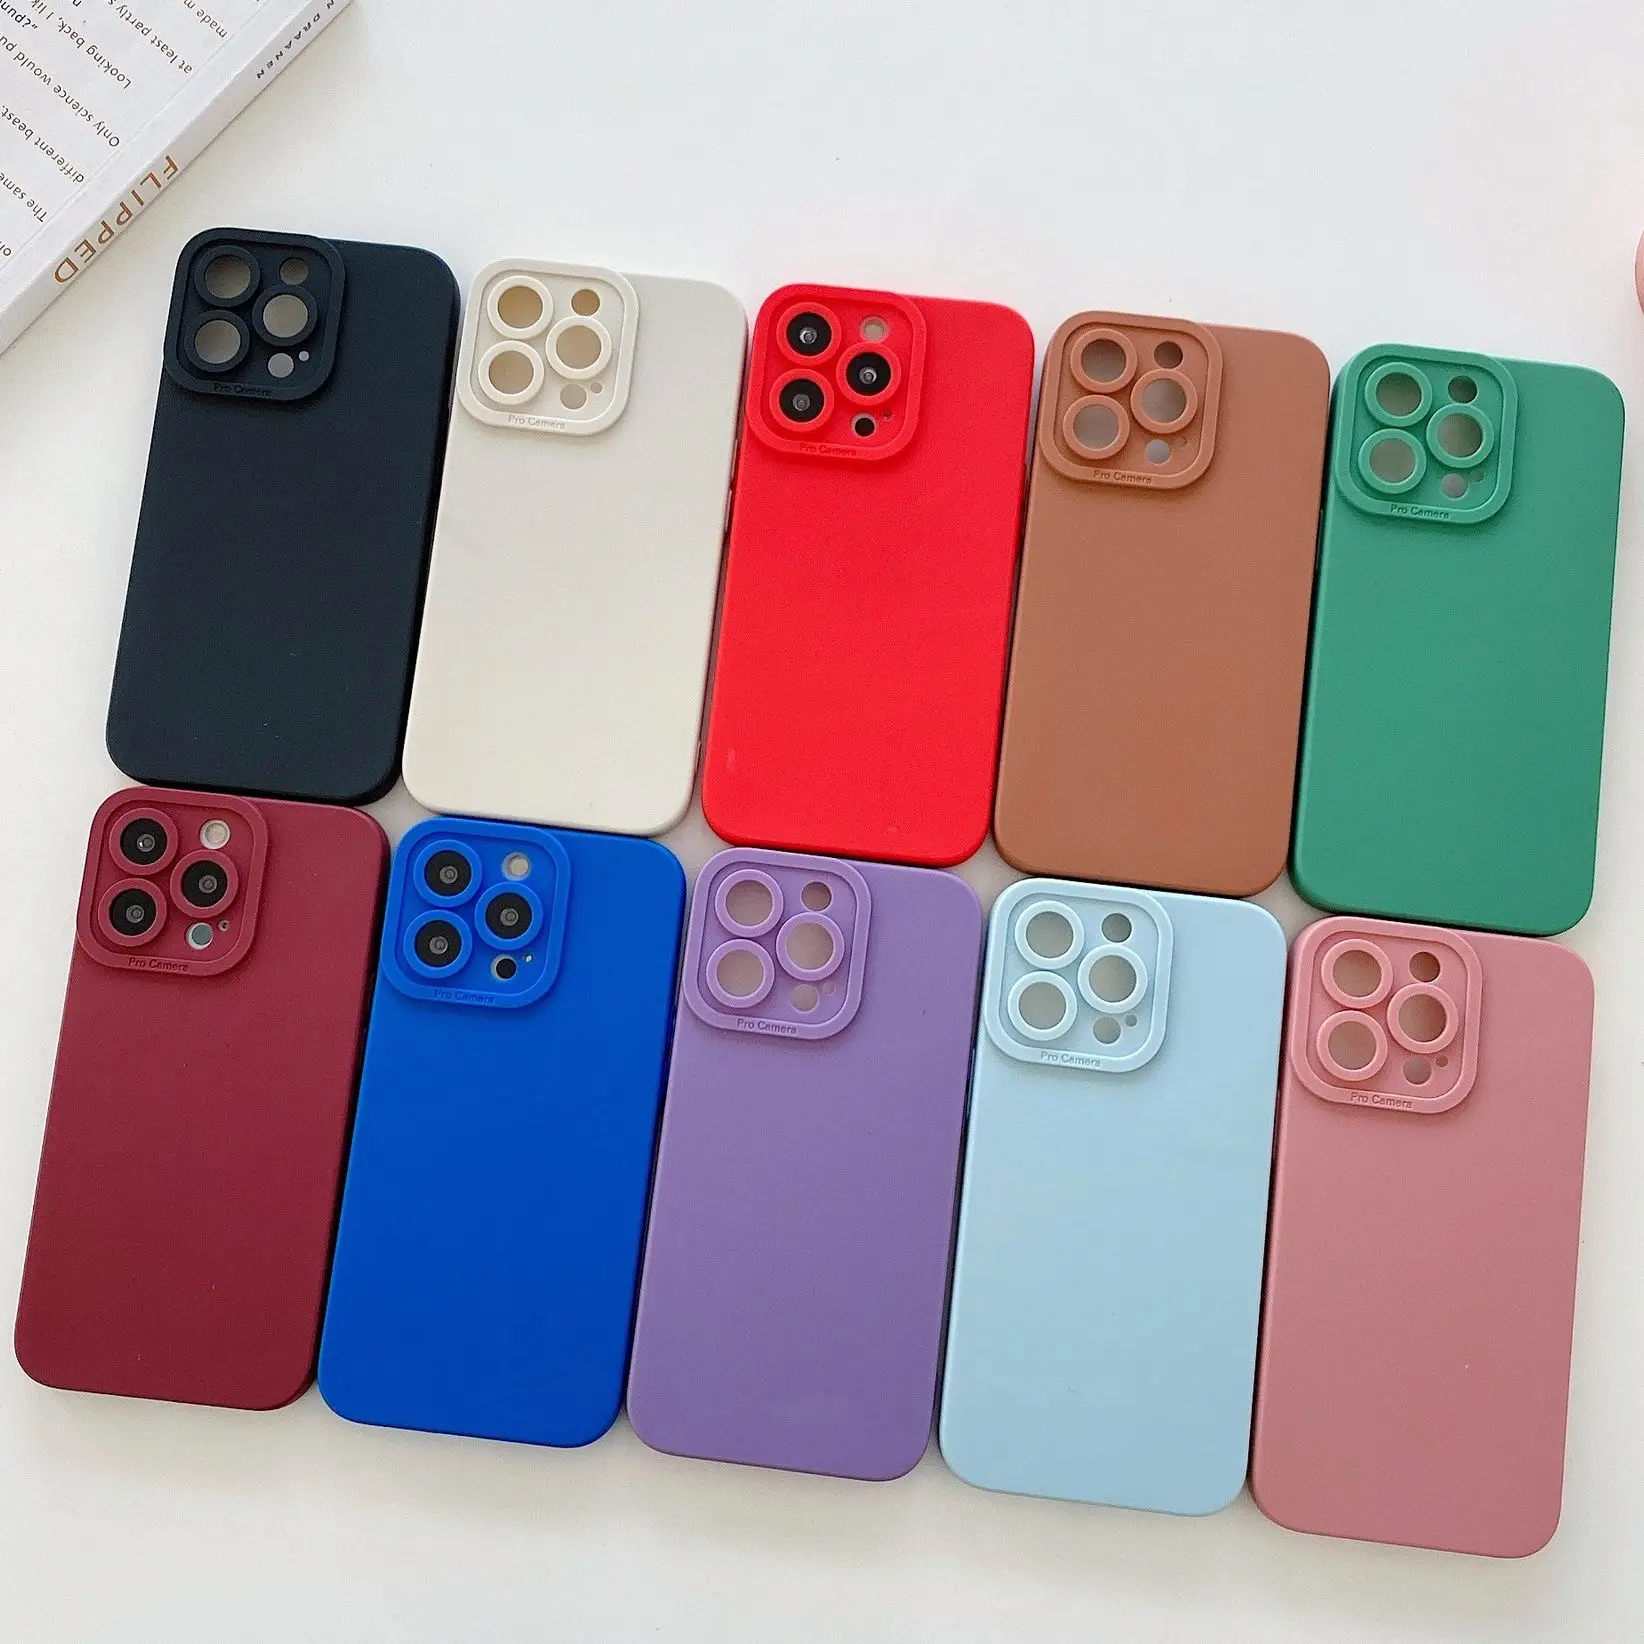 

PUNQZY All-Inclusive Silicone TPU Soft Phone Case For Iphone 11 12 13 PRO MAX 7 8 14 Plus X Lens Protection TPU Soft Shell Cover